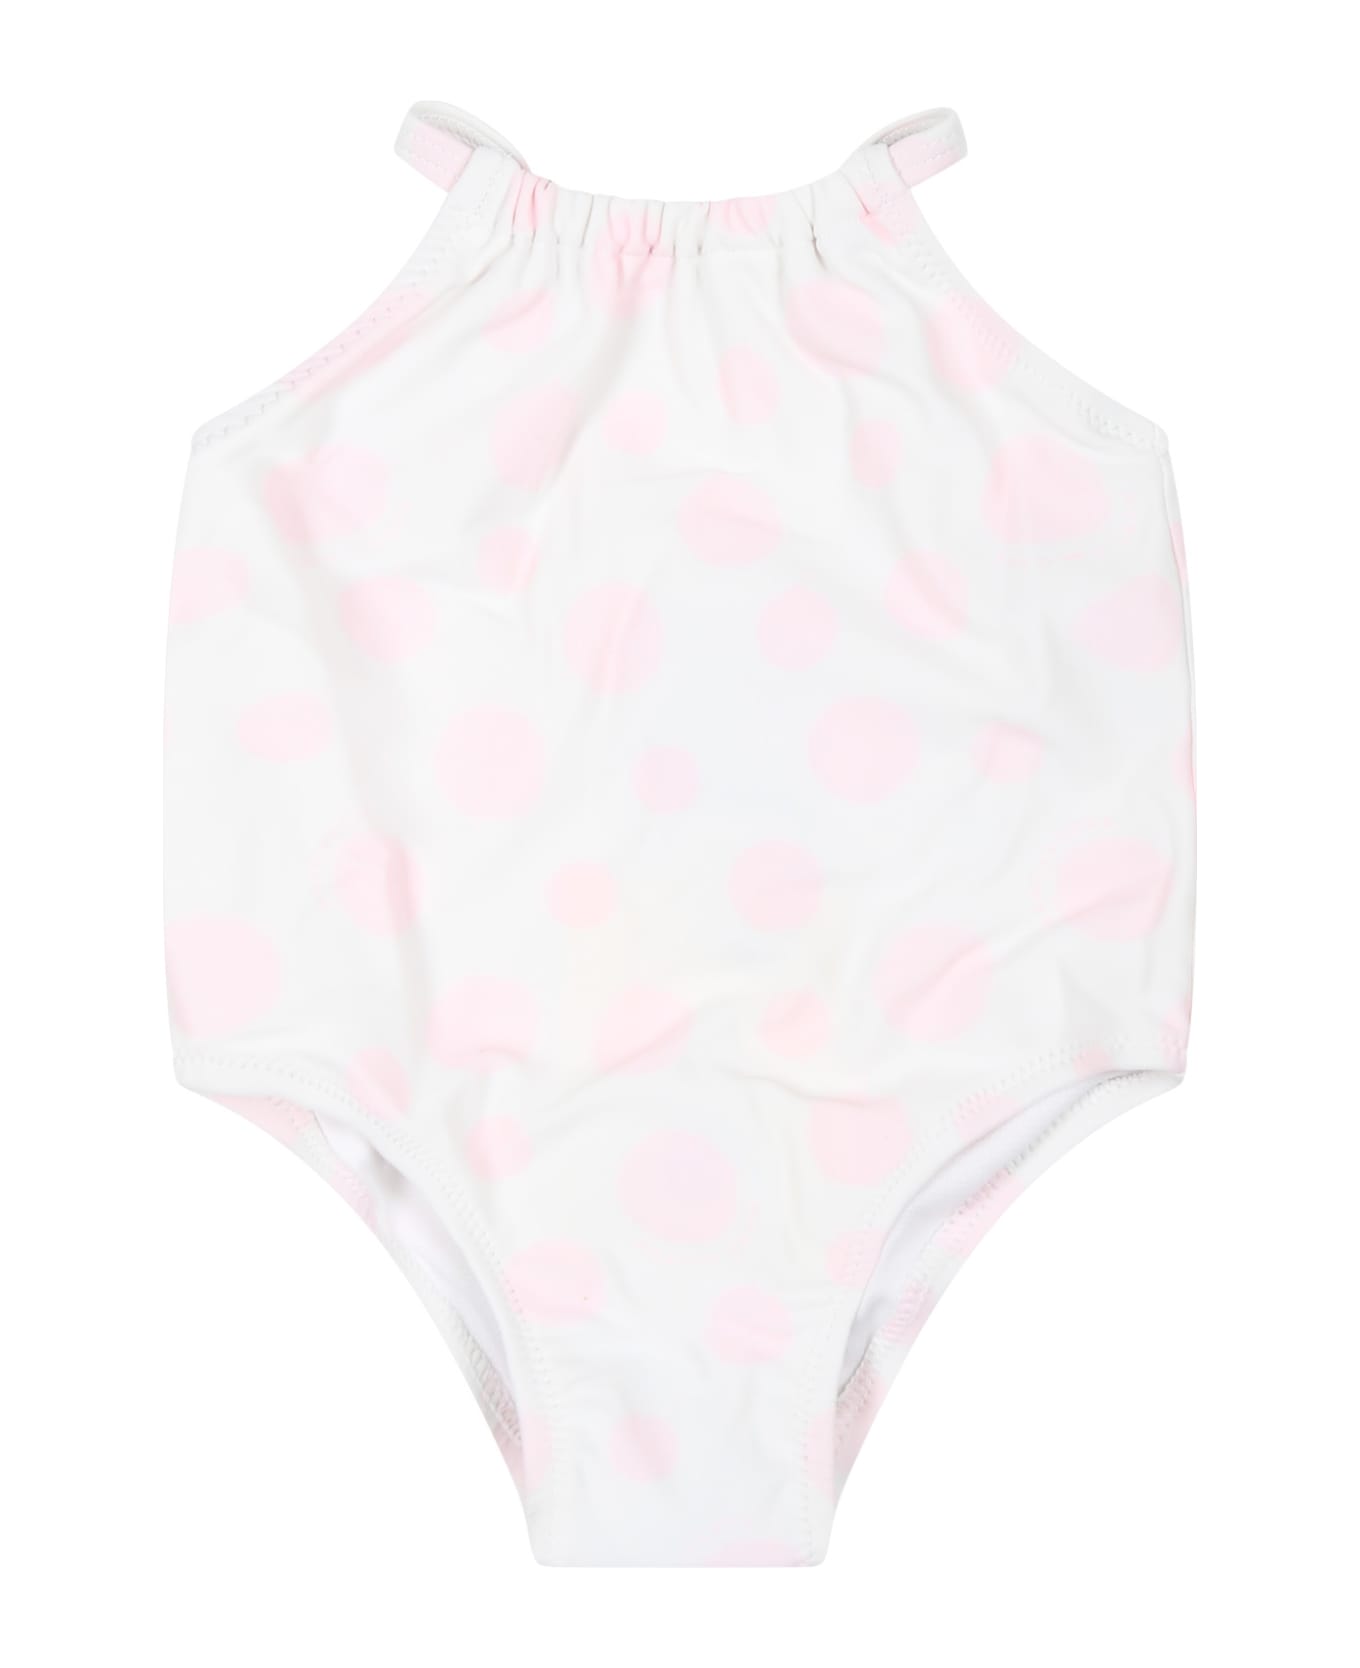 Marc Jacobs White One-piece Swimsuit For Baby Girl With Polka Dot Pattern - White